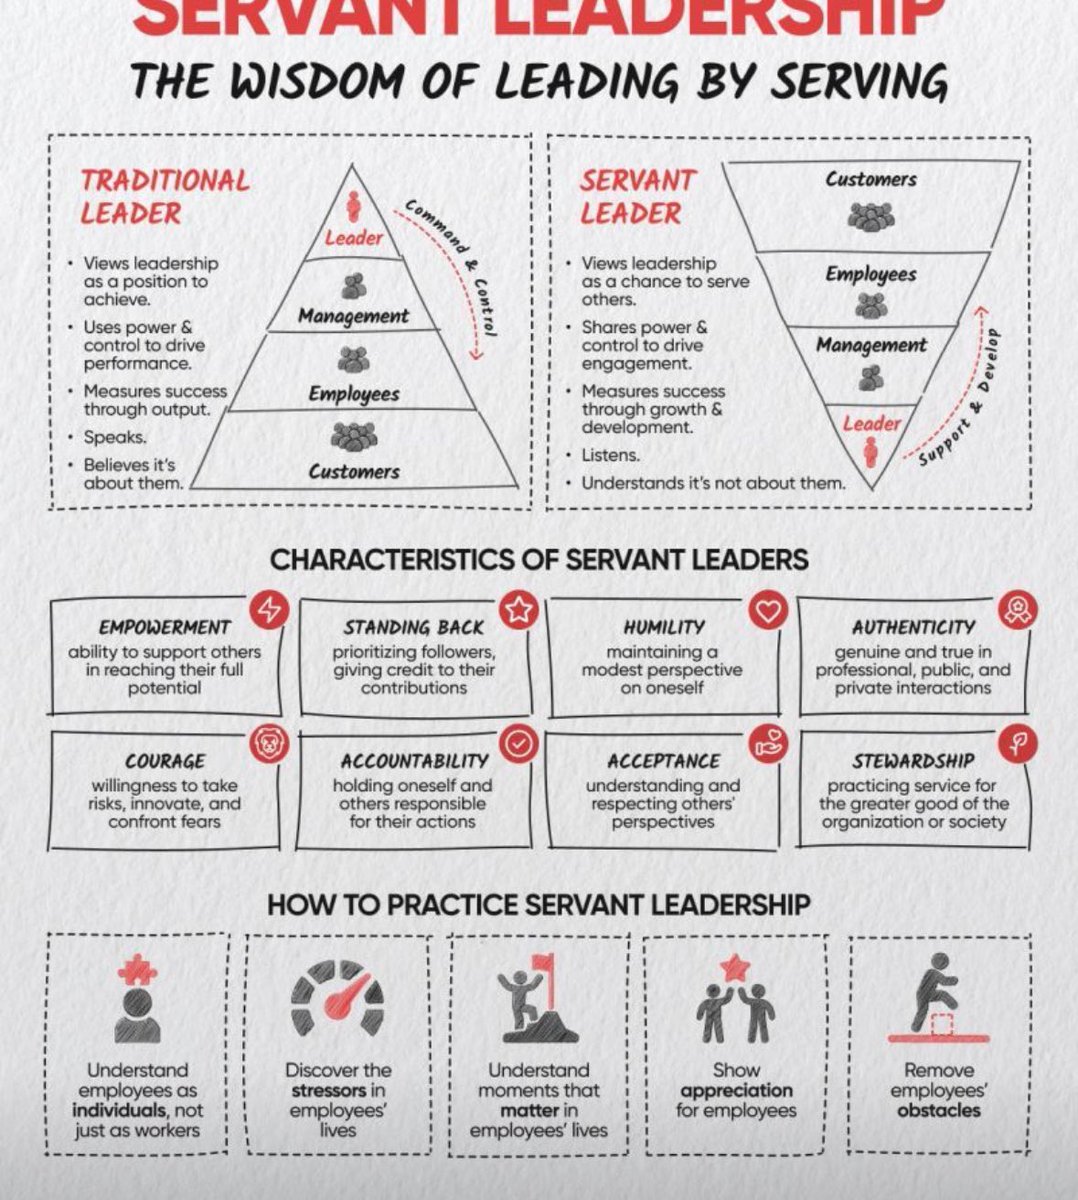 Great reflection on leadership @SpotsySchools @SolutionTree @J_Renaissance @DanHornick @VaPrincipals I have been fortunate to work with many leaders with this mindset and unfortunate to work with a few with the opposite view @oduedlead @Leadershipprin1